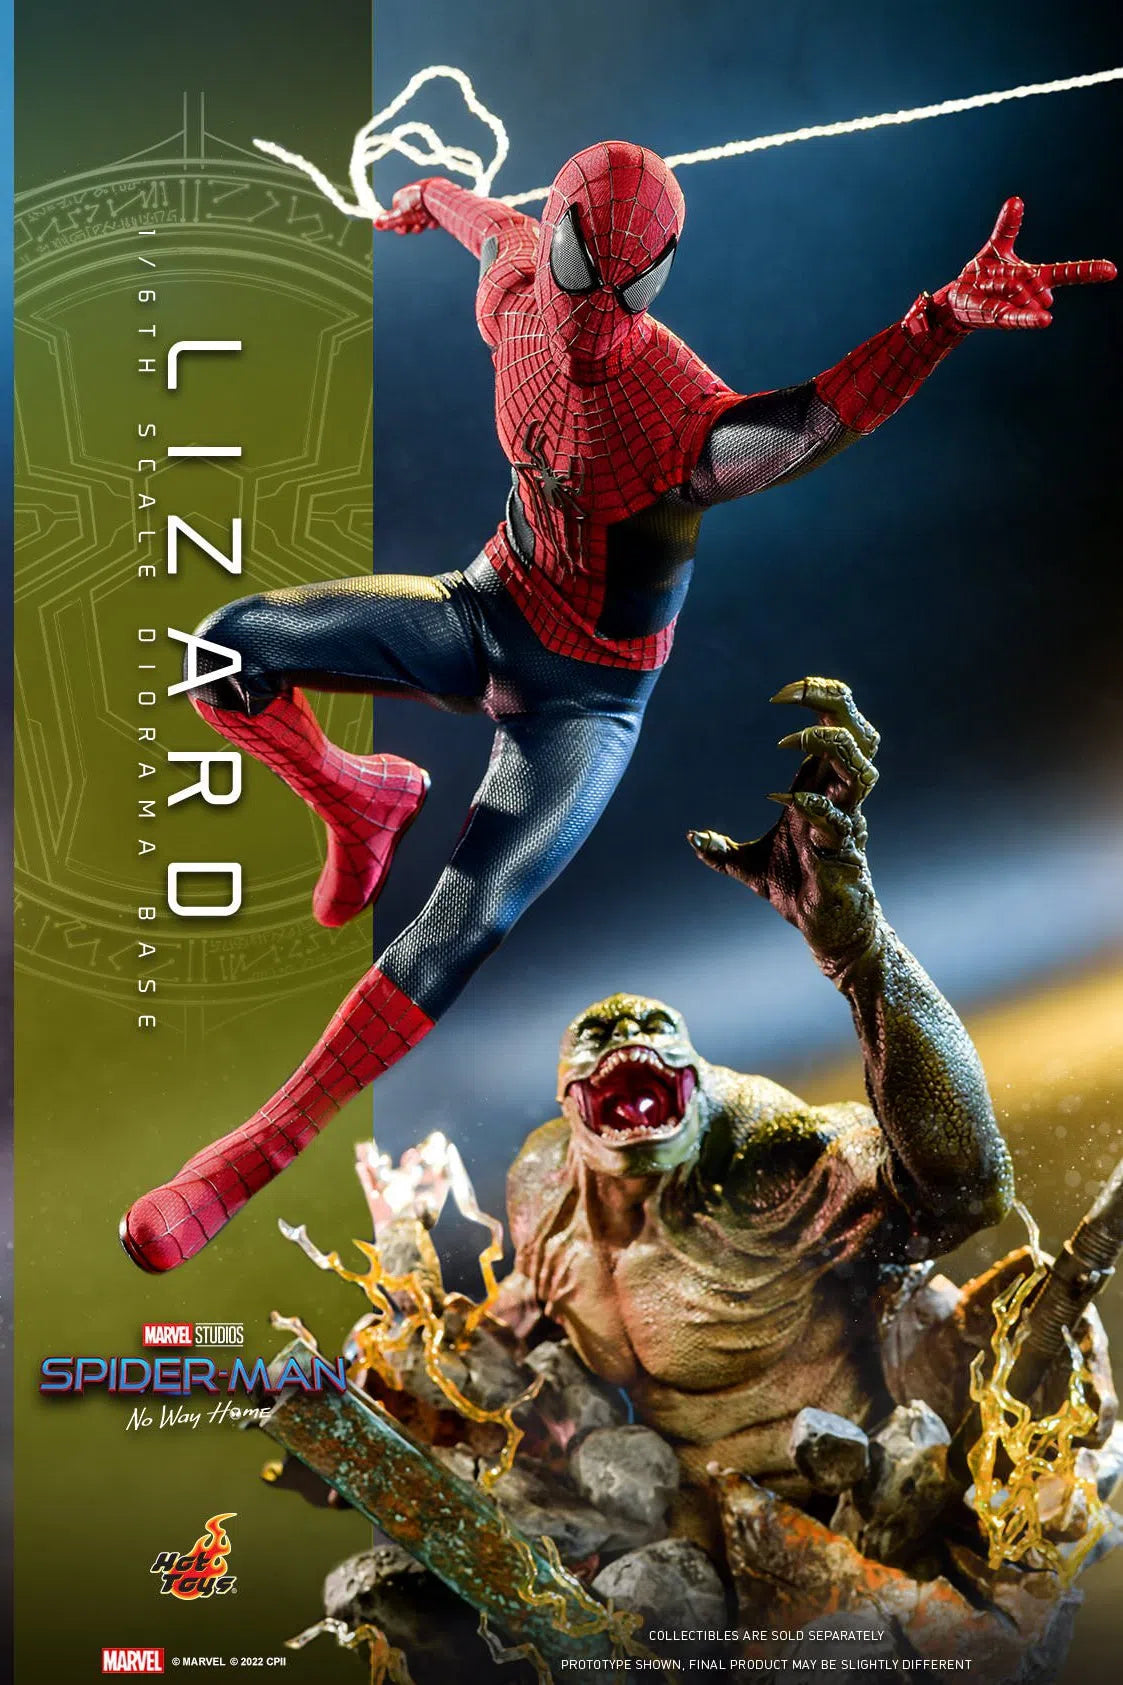 Spider-Man: With Lizard: The Amazing Spider-Man 2 Hot Toys